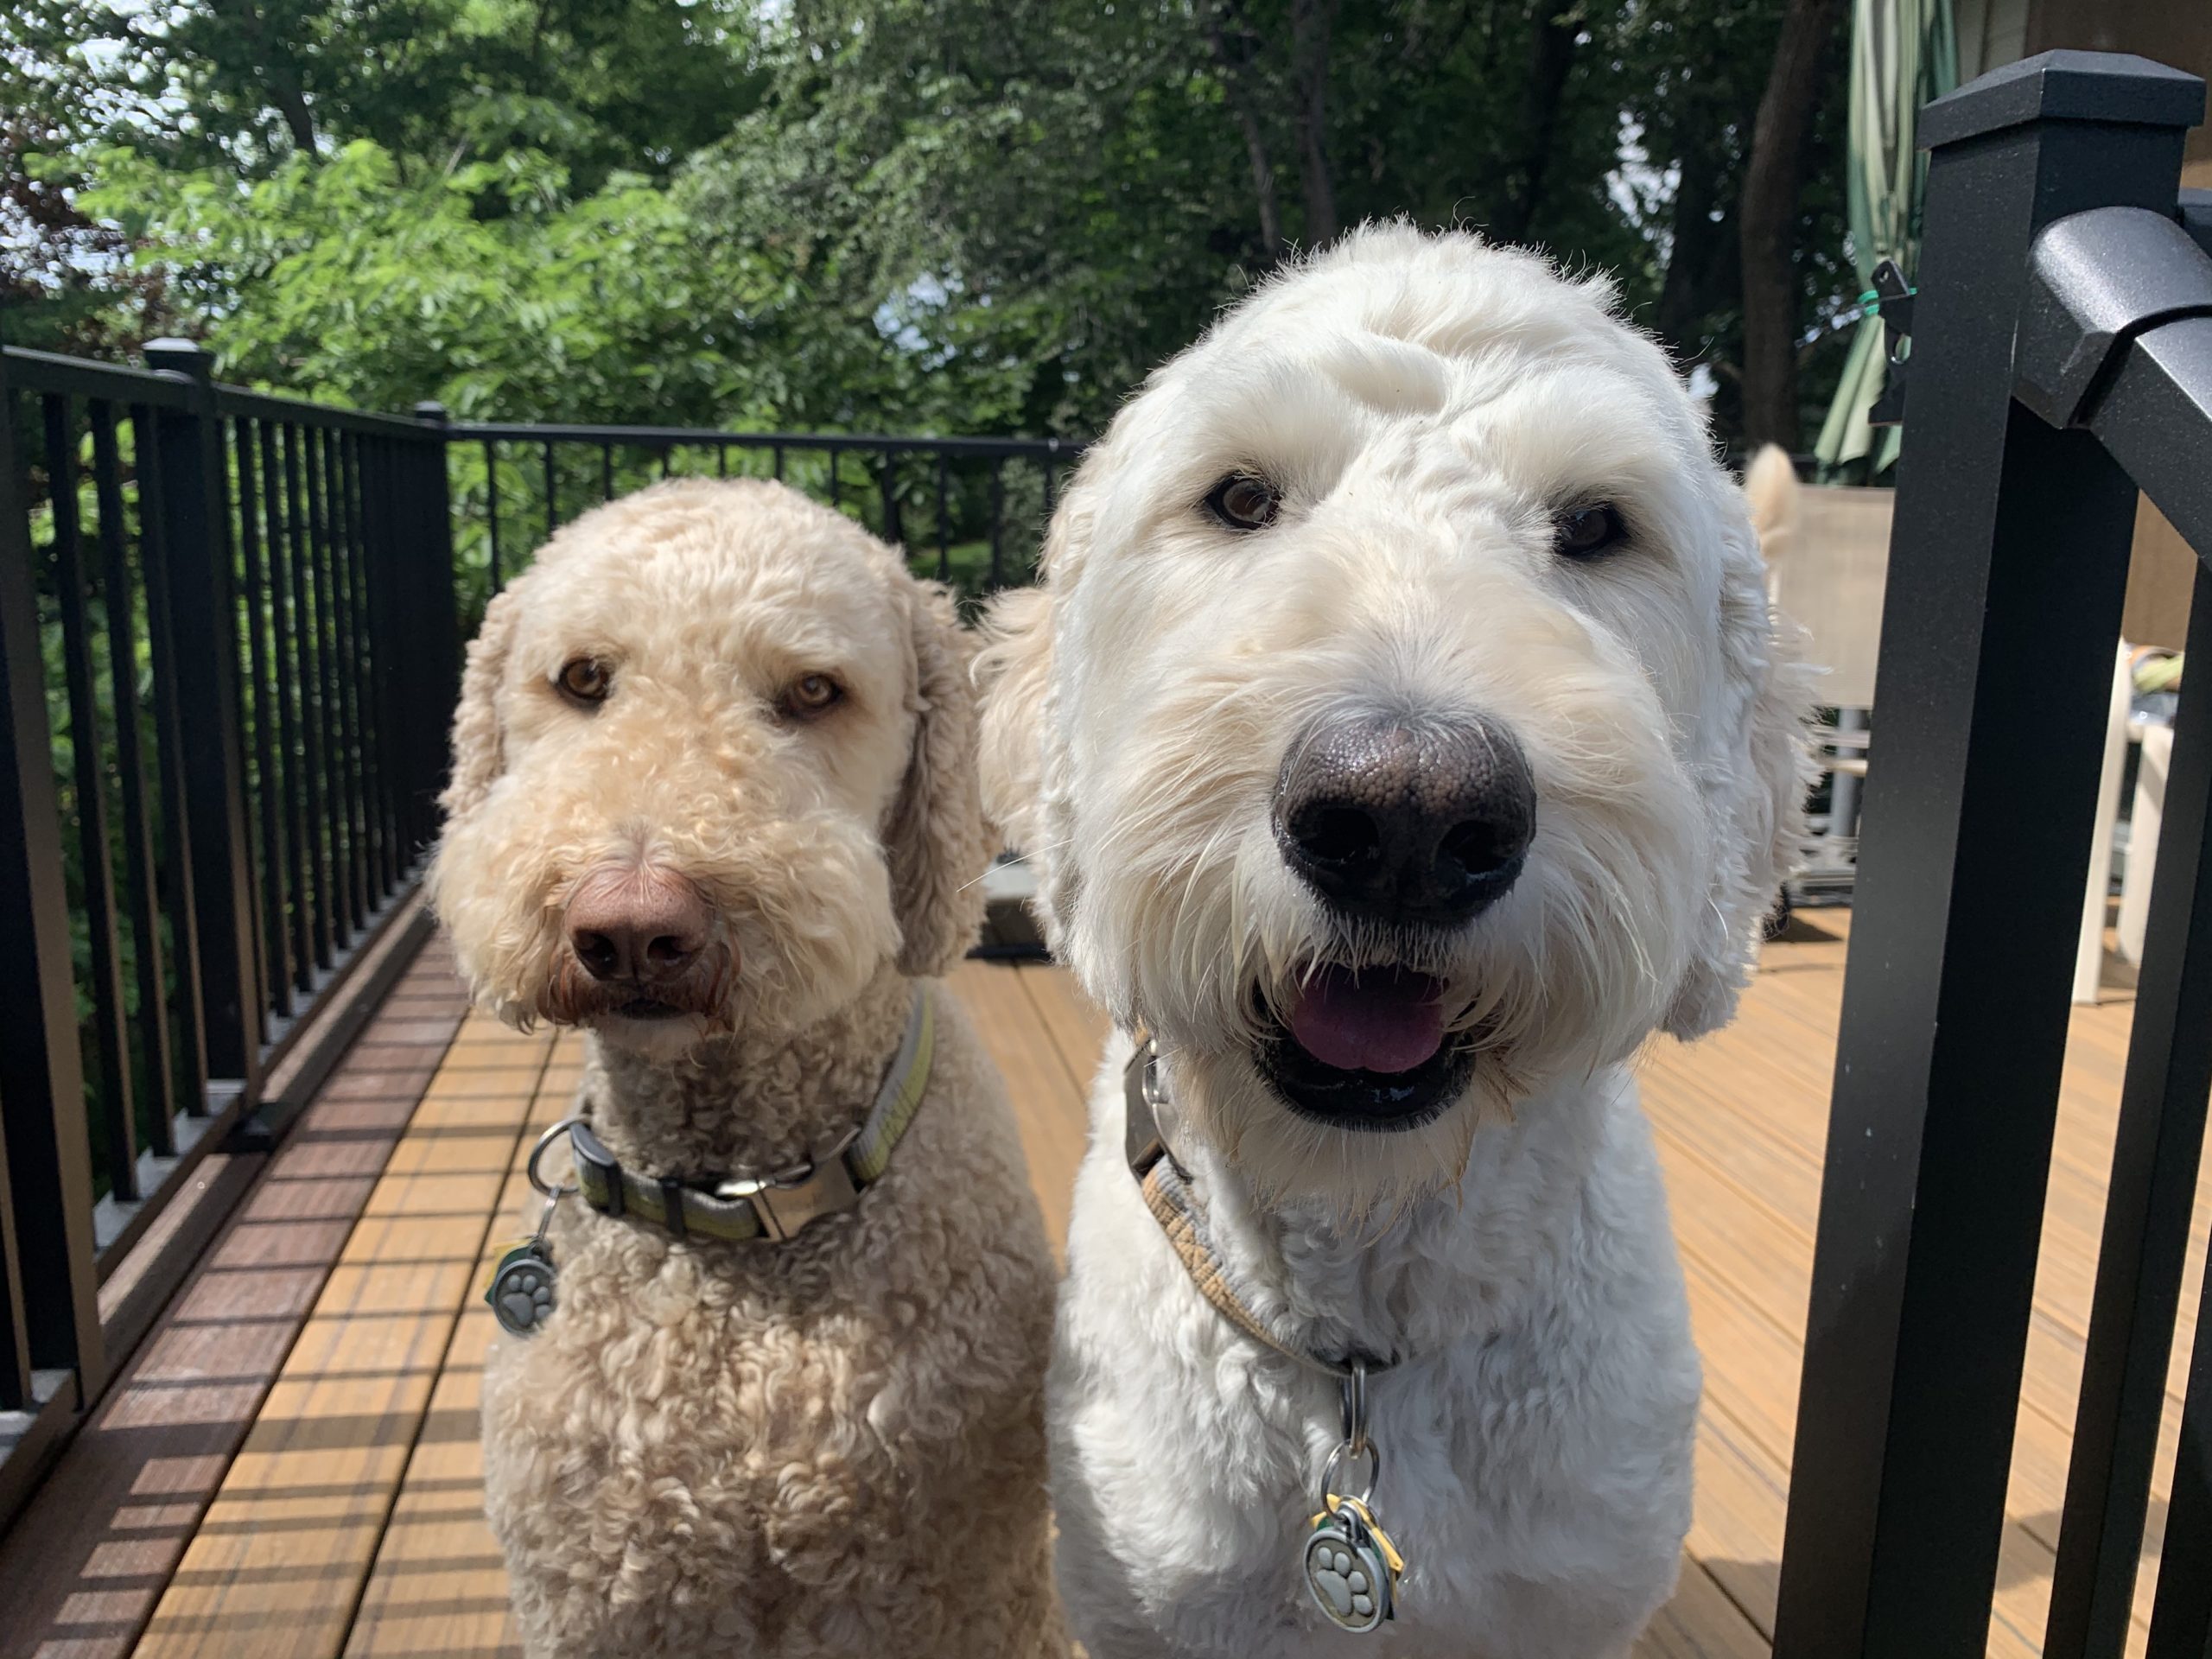 Doodle and Snicker scaled - Tips to Get Dogs to Listen Better and Stop Barking in the Yard